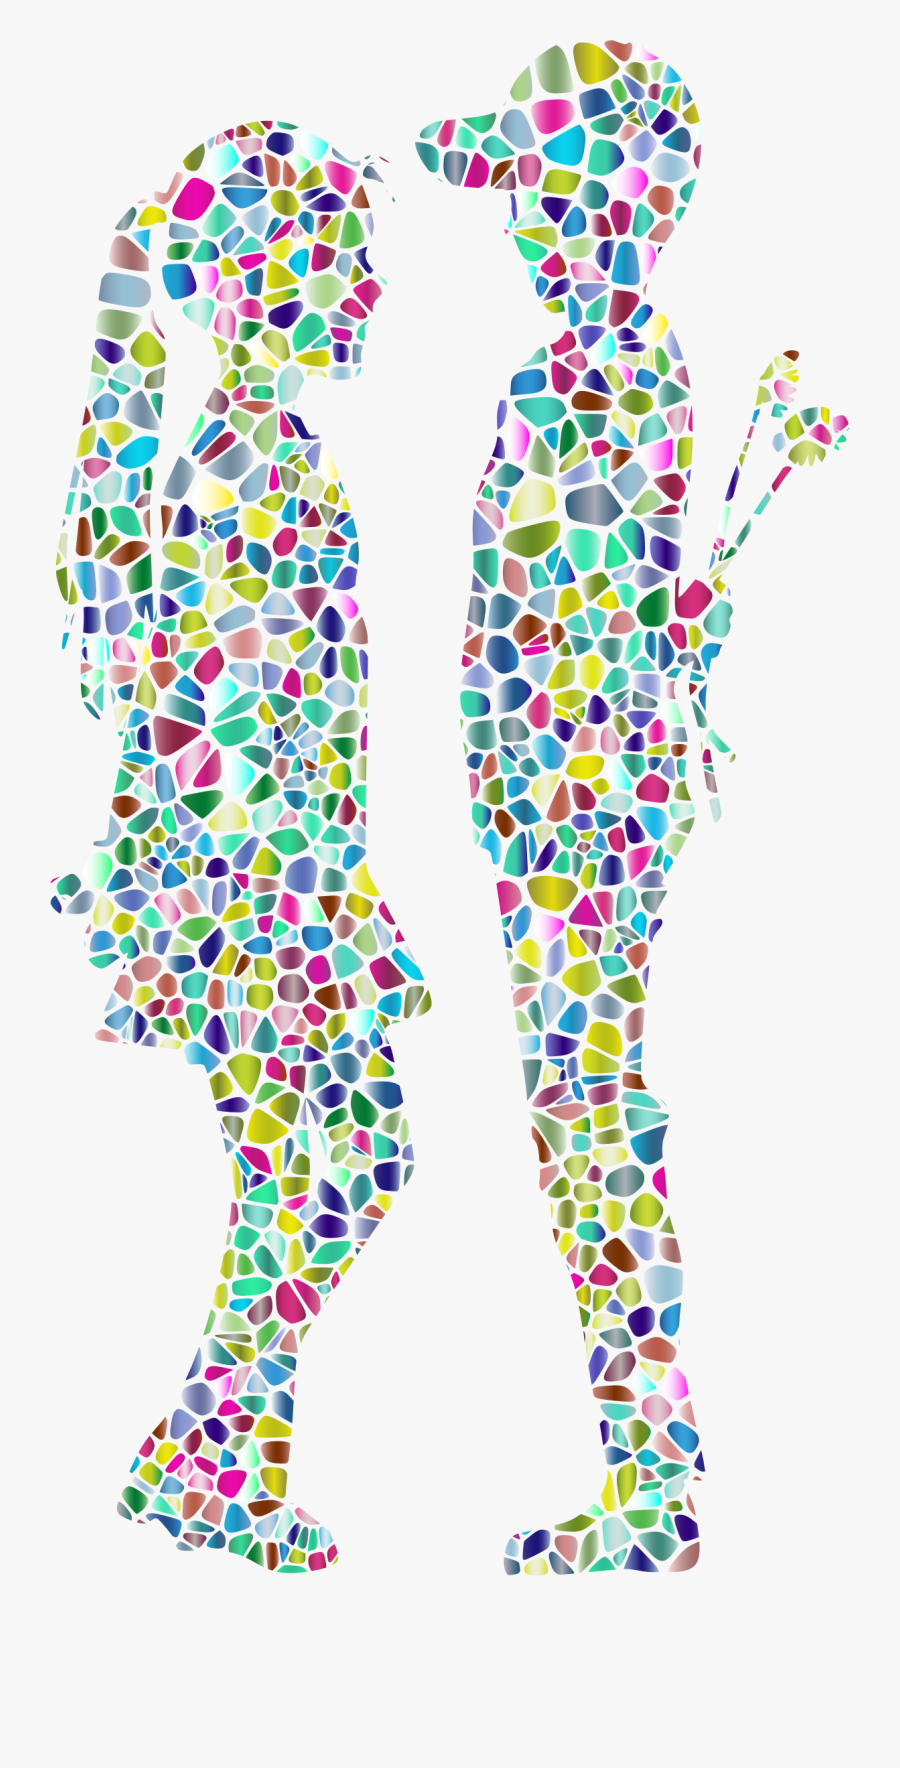 Polyprismatic Tiled Boy Giving Flowers To Girl Silhouette - Boy Giving Flowers A Girl, Transparent Clipart